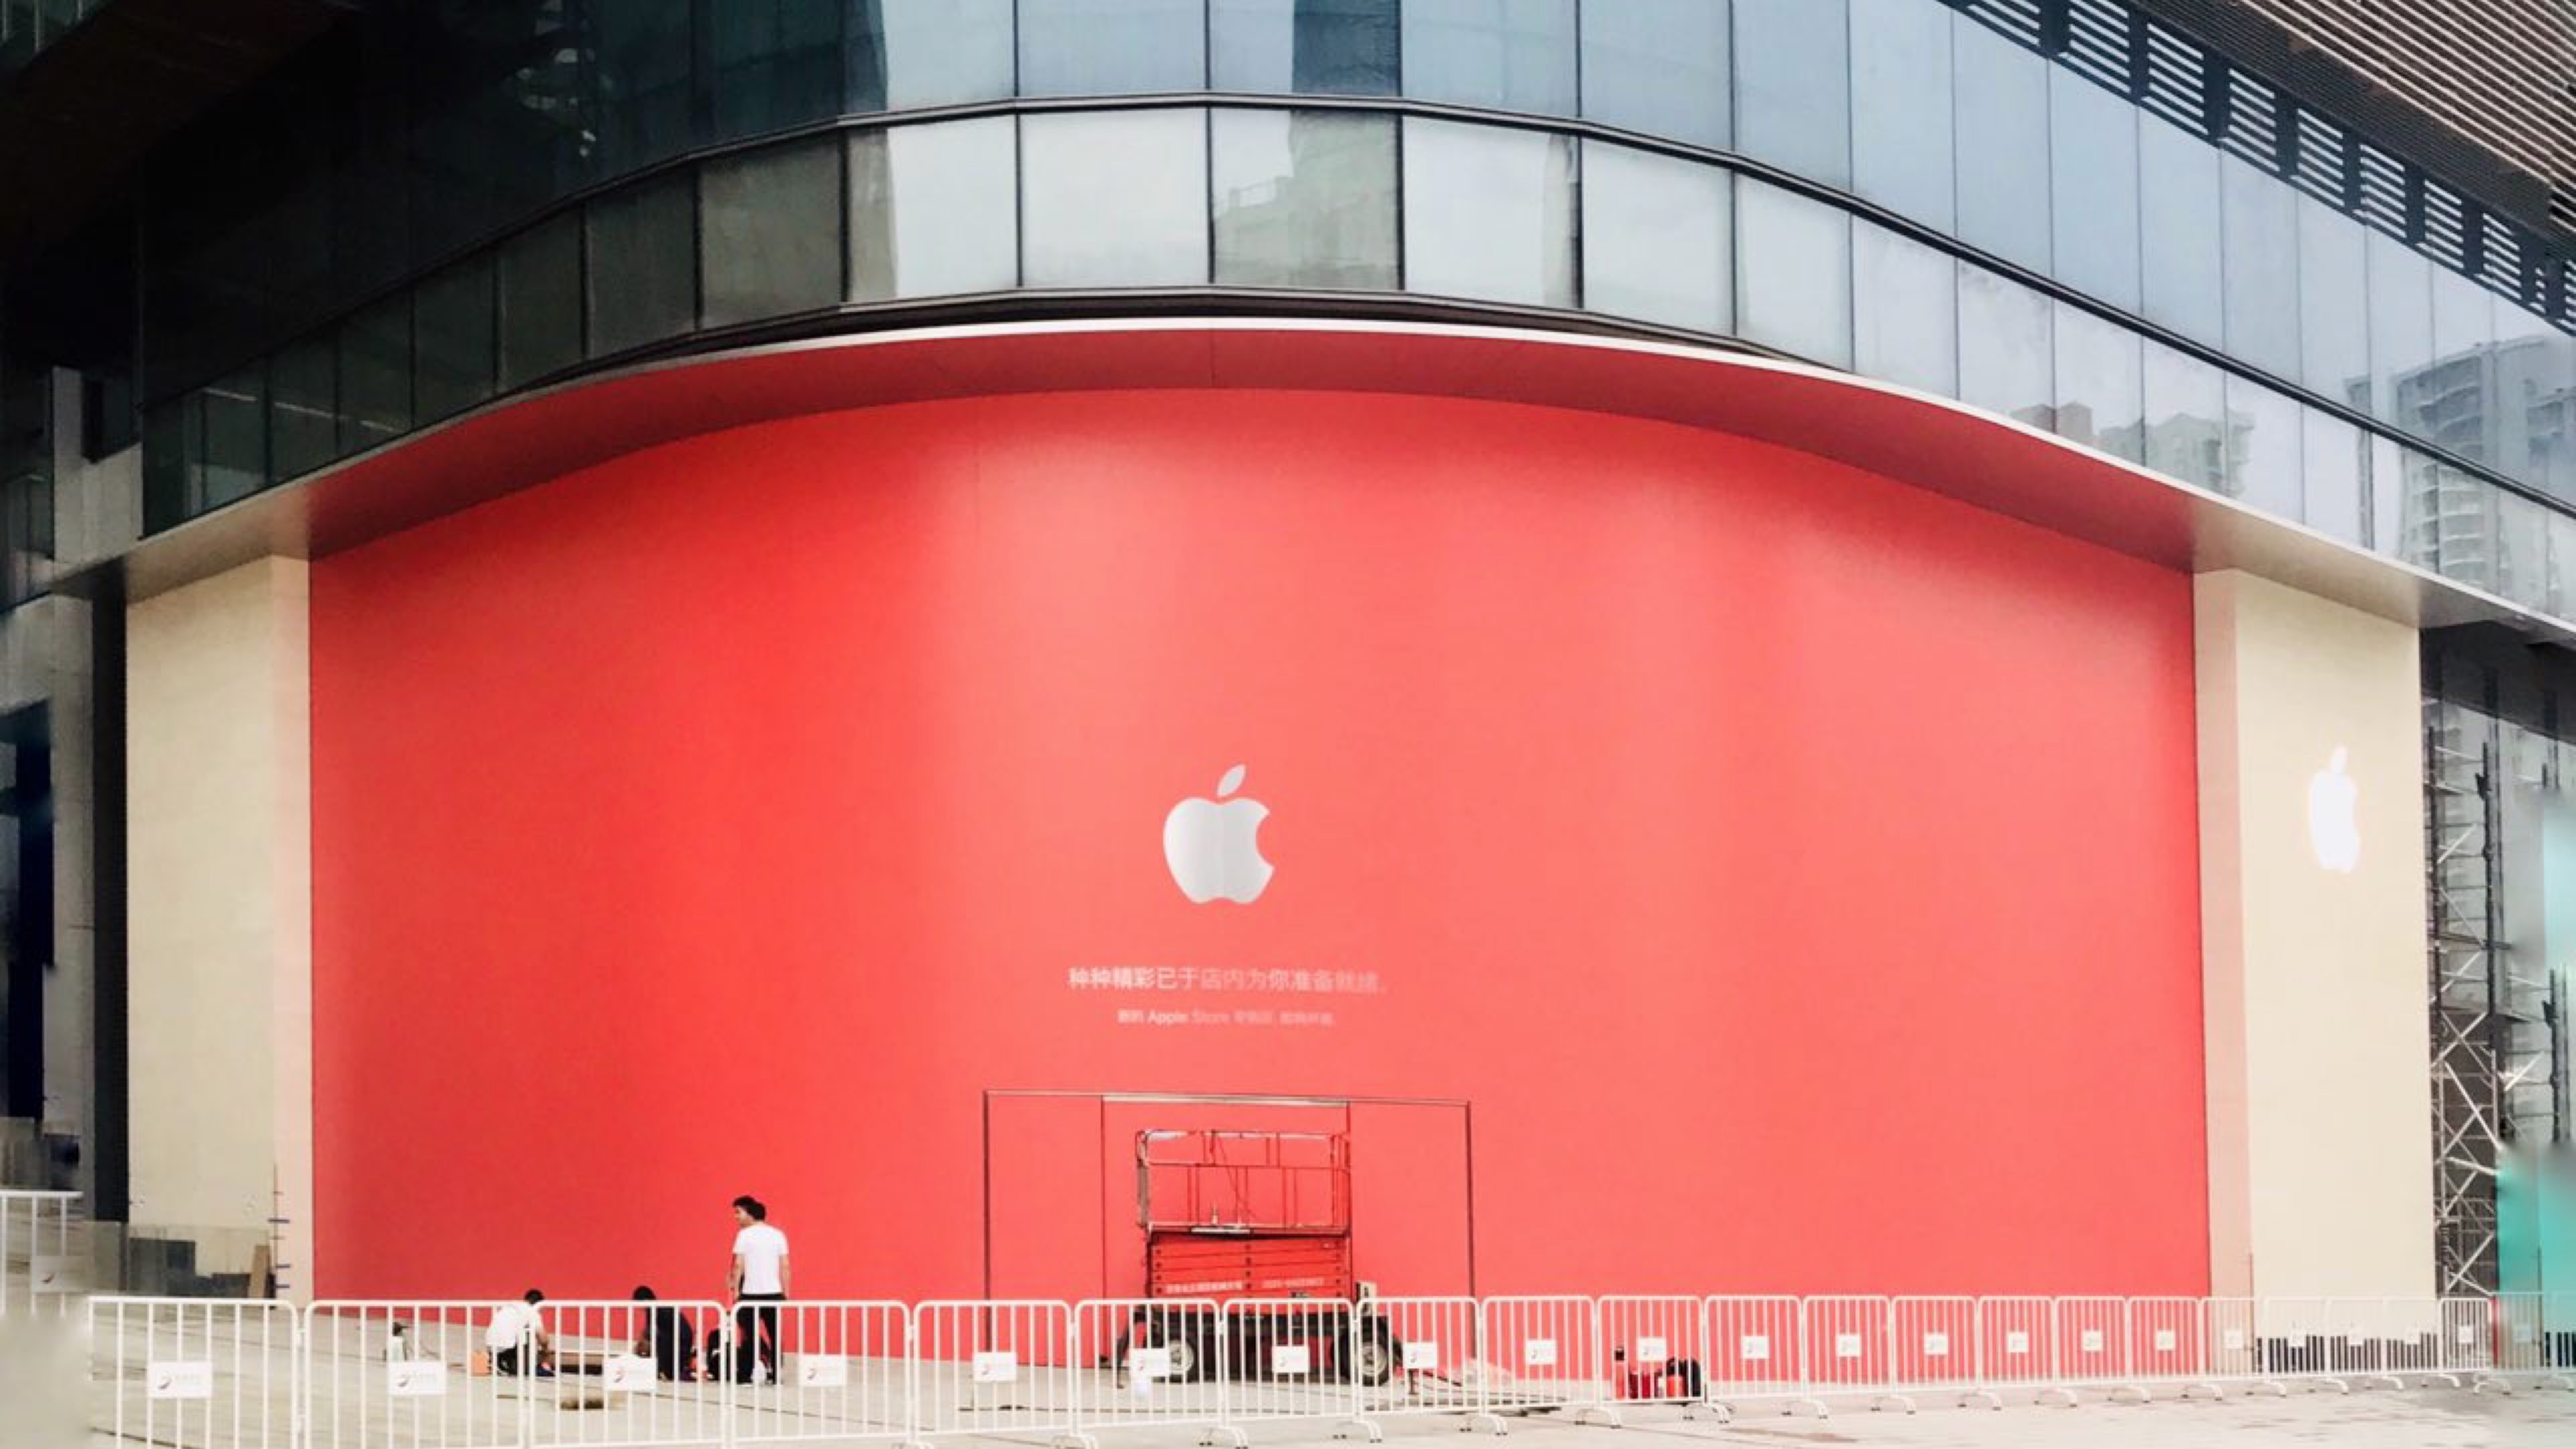 Photos: Waterside Shops Apple Store reopens with new design - 9to5Mac